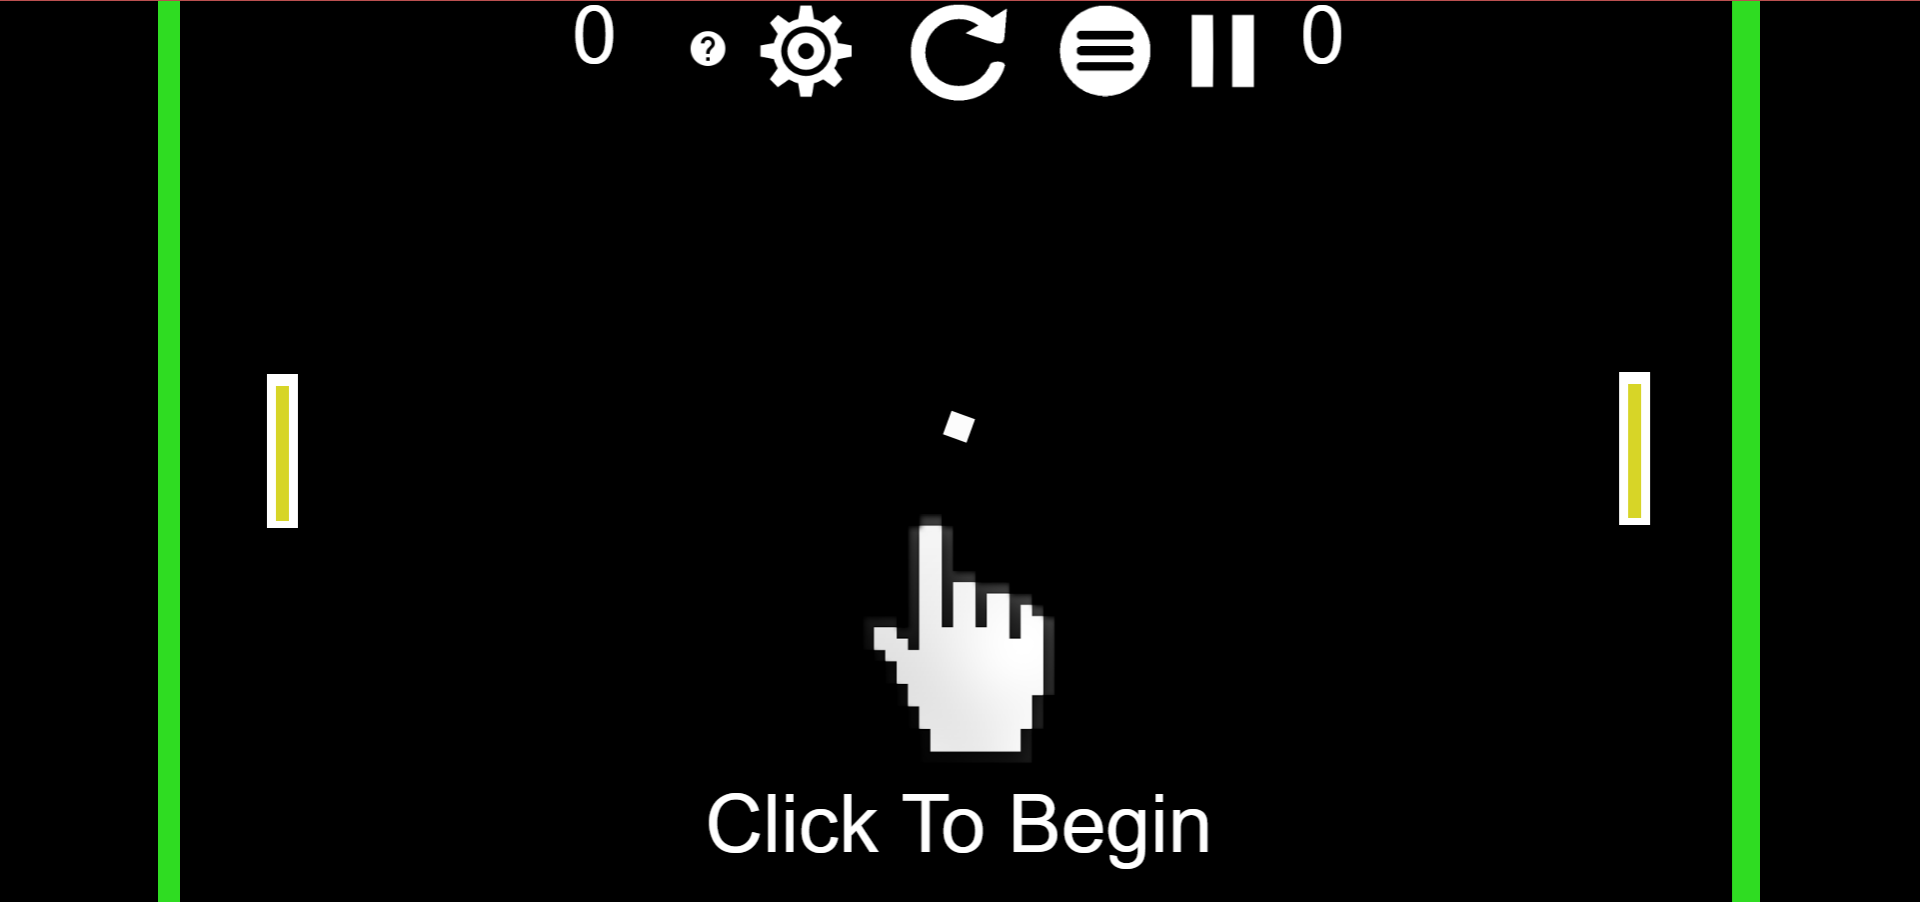 click to start pong game browser